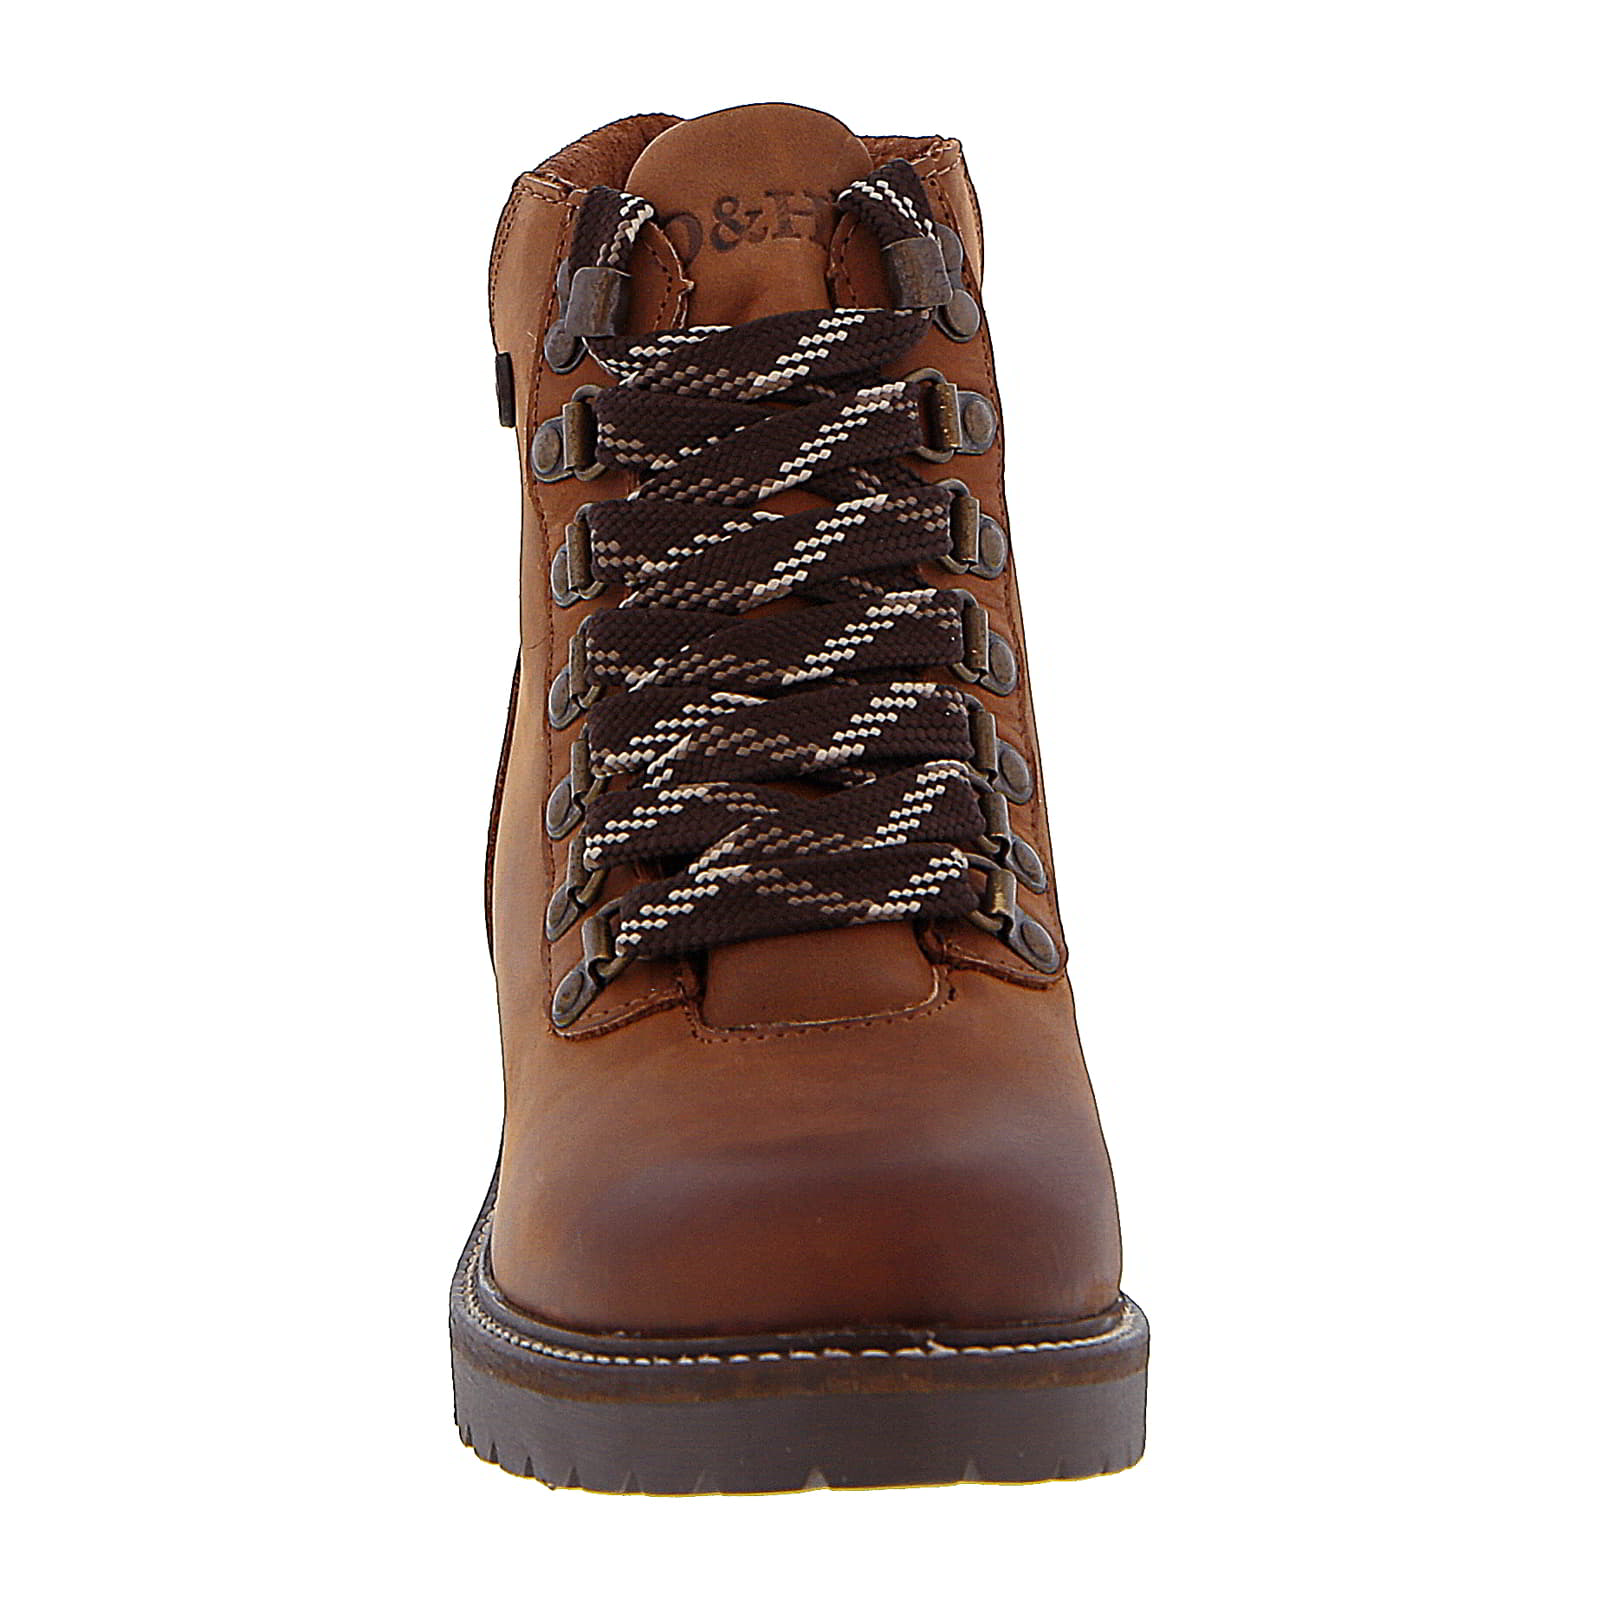 Womens Sierra Nevada Leather Hiker Ankle Boots - Cognac